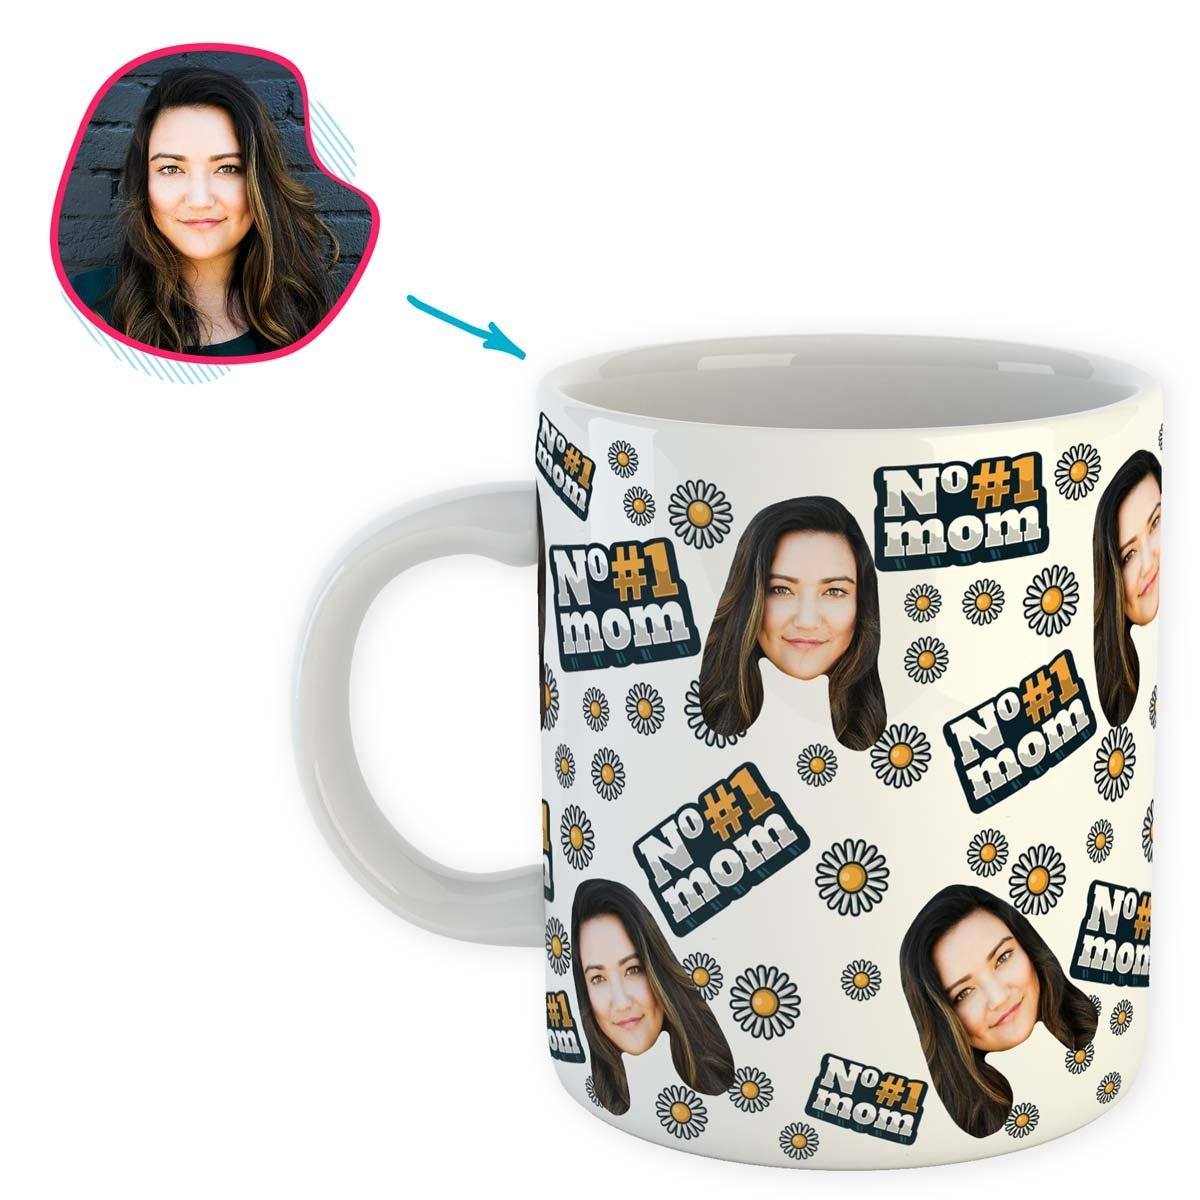 white #1 Mom mug personalized with photo of face printed on it